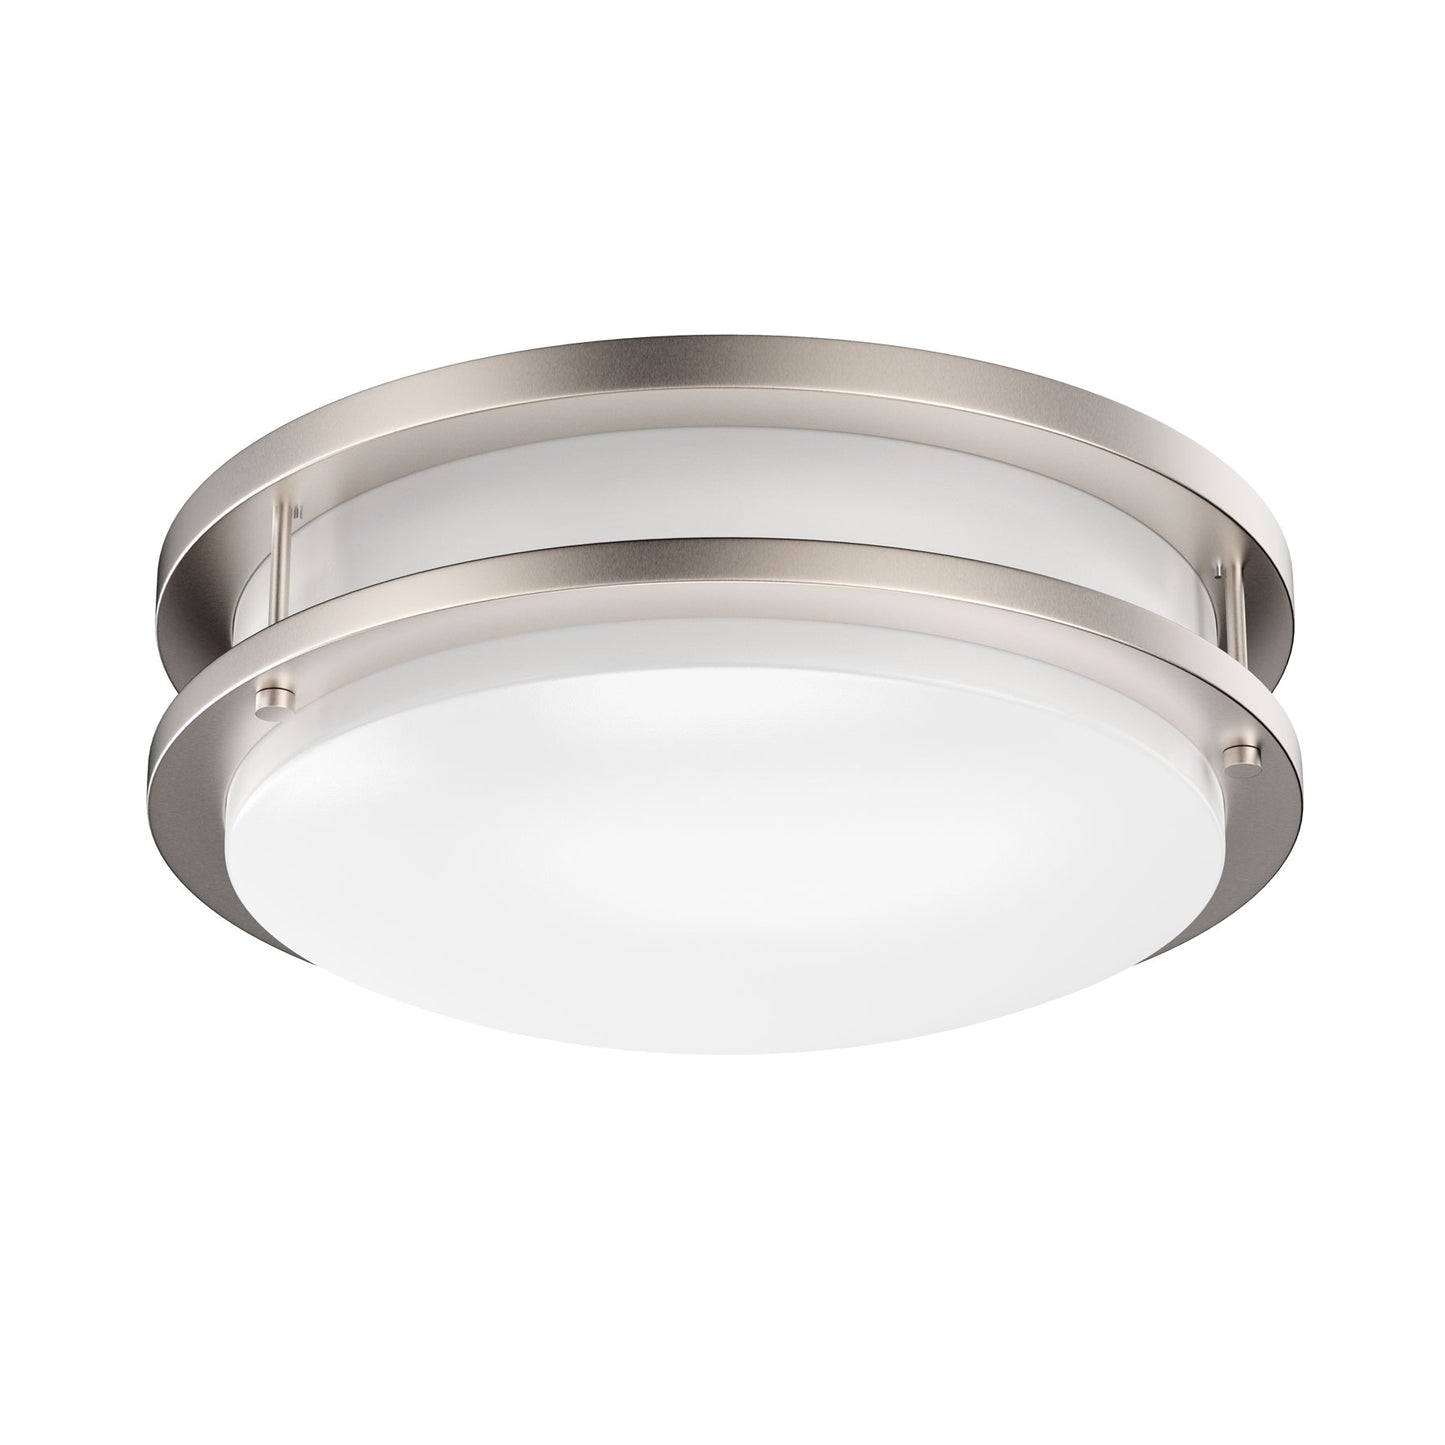 12 in. Dimmable LED Flush Mount Ceiling Lights, Double Ring, 14W, 1100LM, 3000K Warm White, Brushed Nickel Finish Steel, ETL Listed, For Hallway Kitchen Stairwell